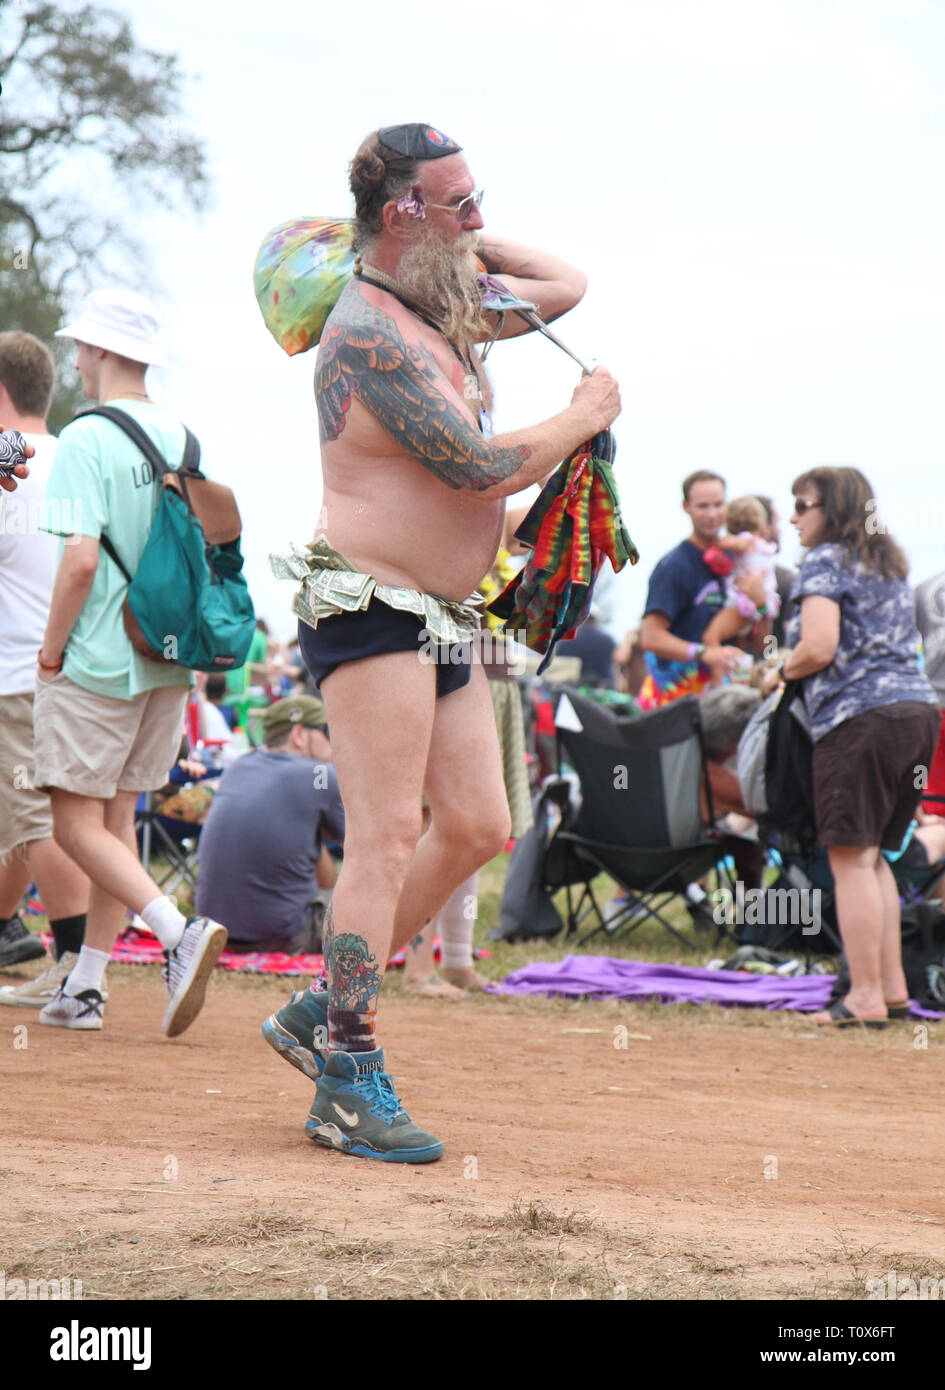 This concert goer shows off his tattoos, dollar bills and more, as he struts his stuff at an outdoor summer music festival. Stock Photo